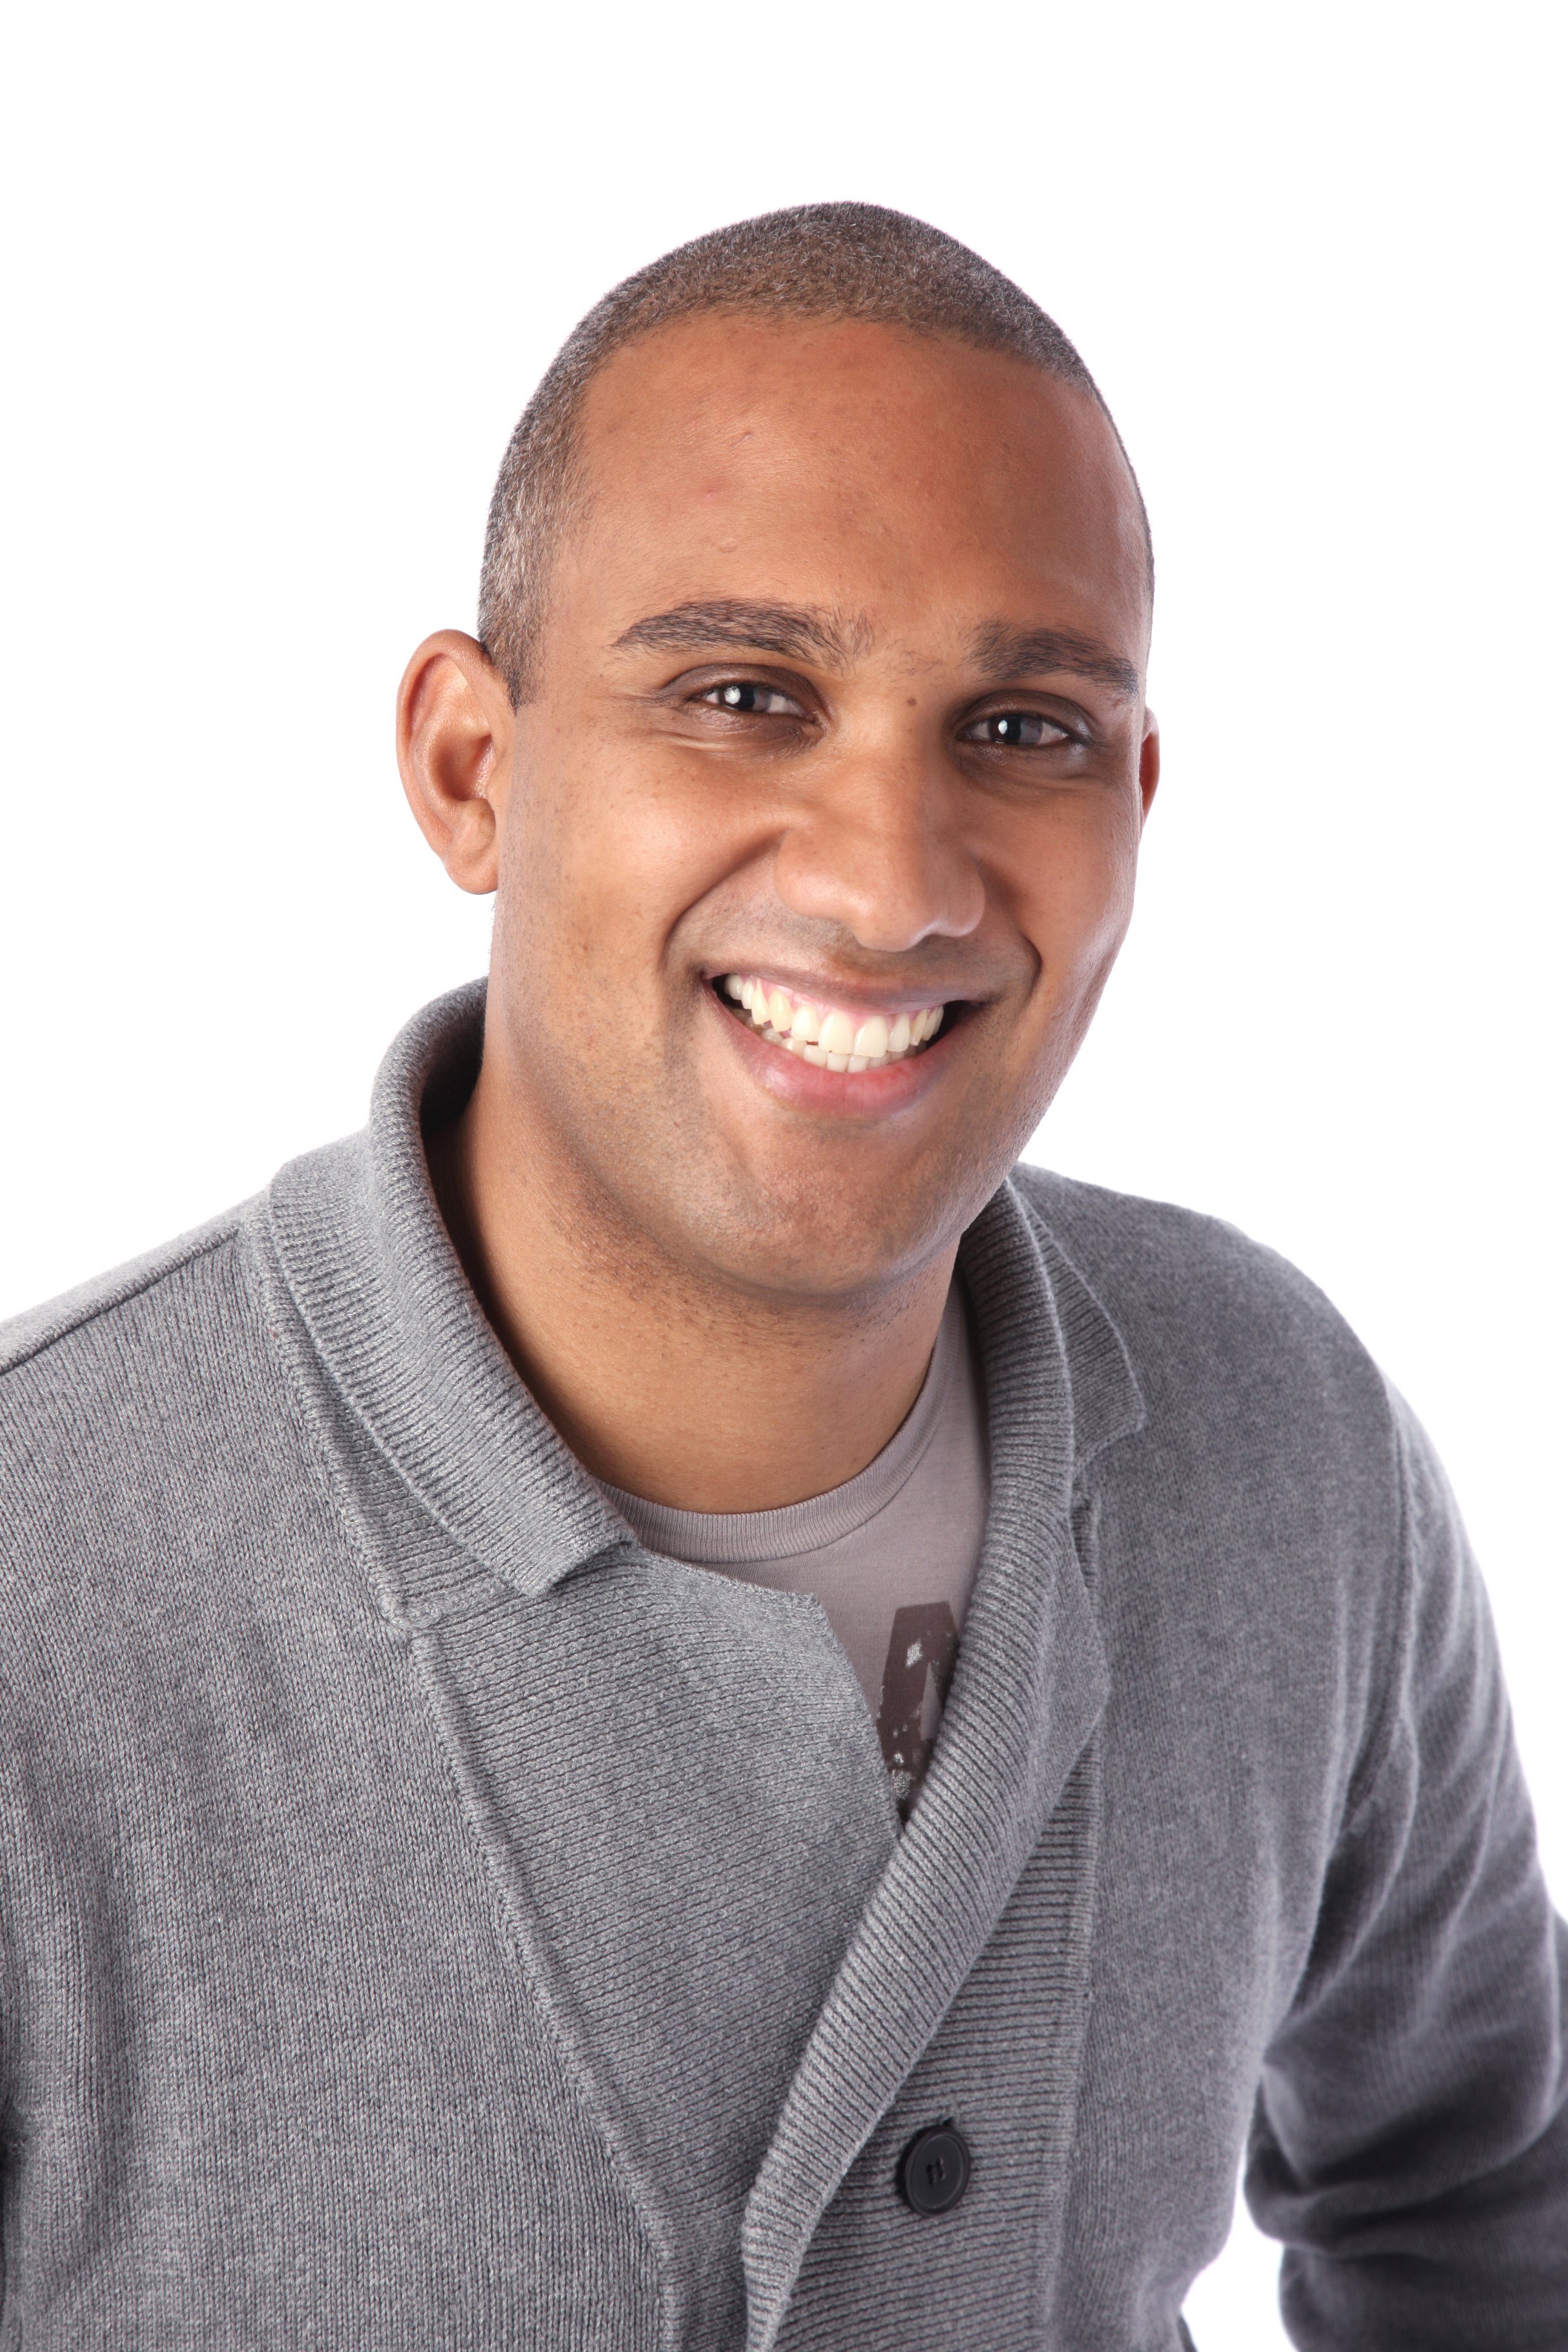 The picture shows a smiling life coach named Marcus Abrahams. He looks relaxed in a soft grey cardigan and tee shirt.